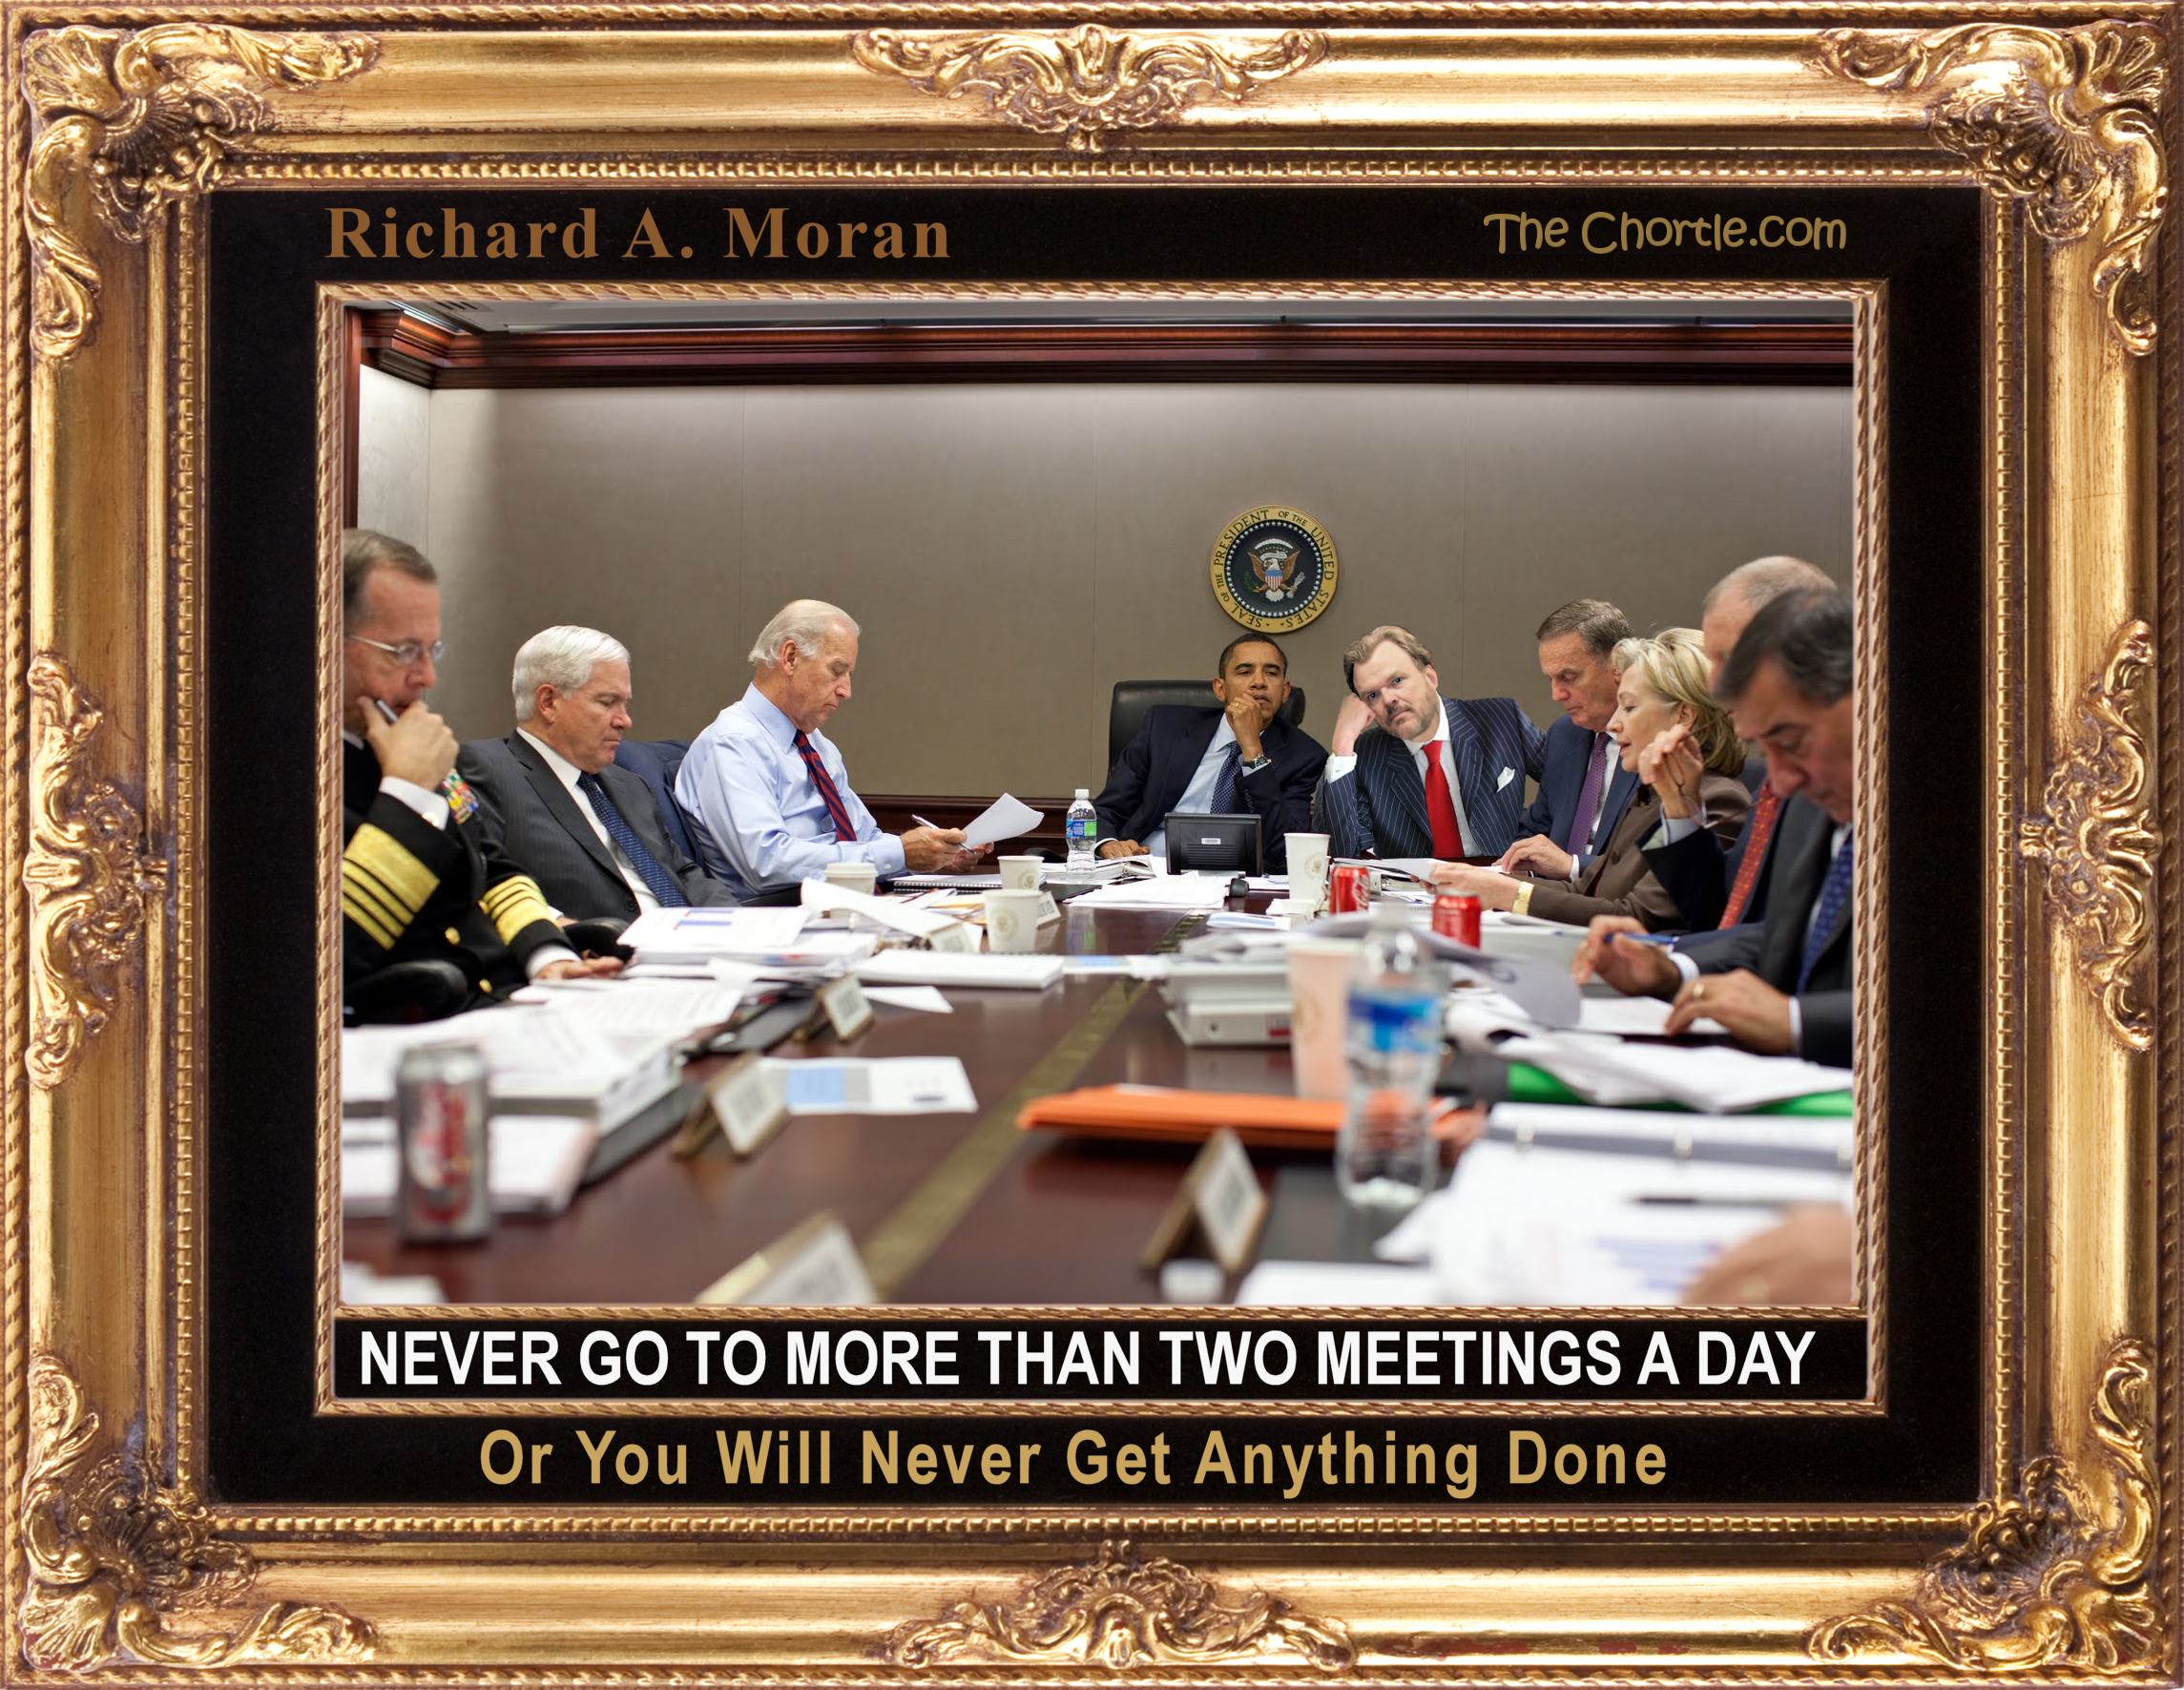 Never go to more that two meetings a day or you will never get anything done.